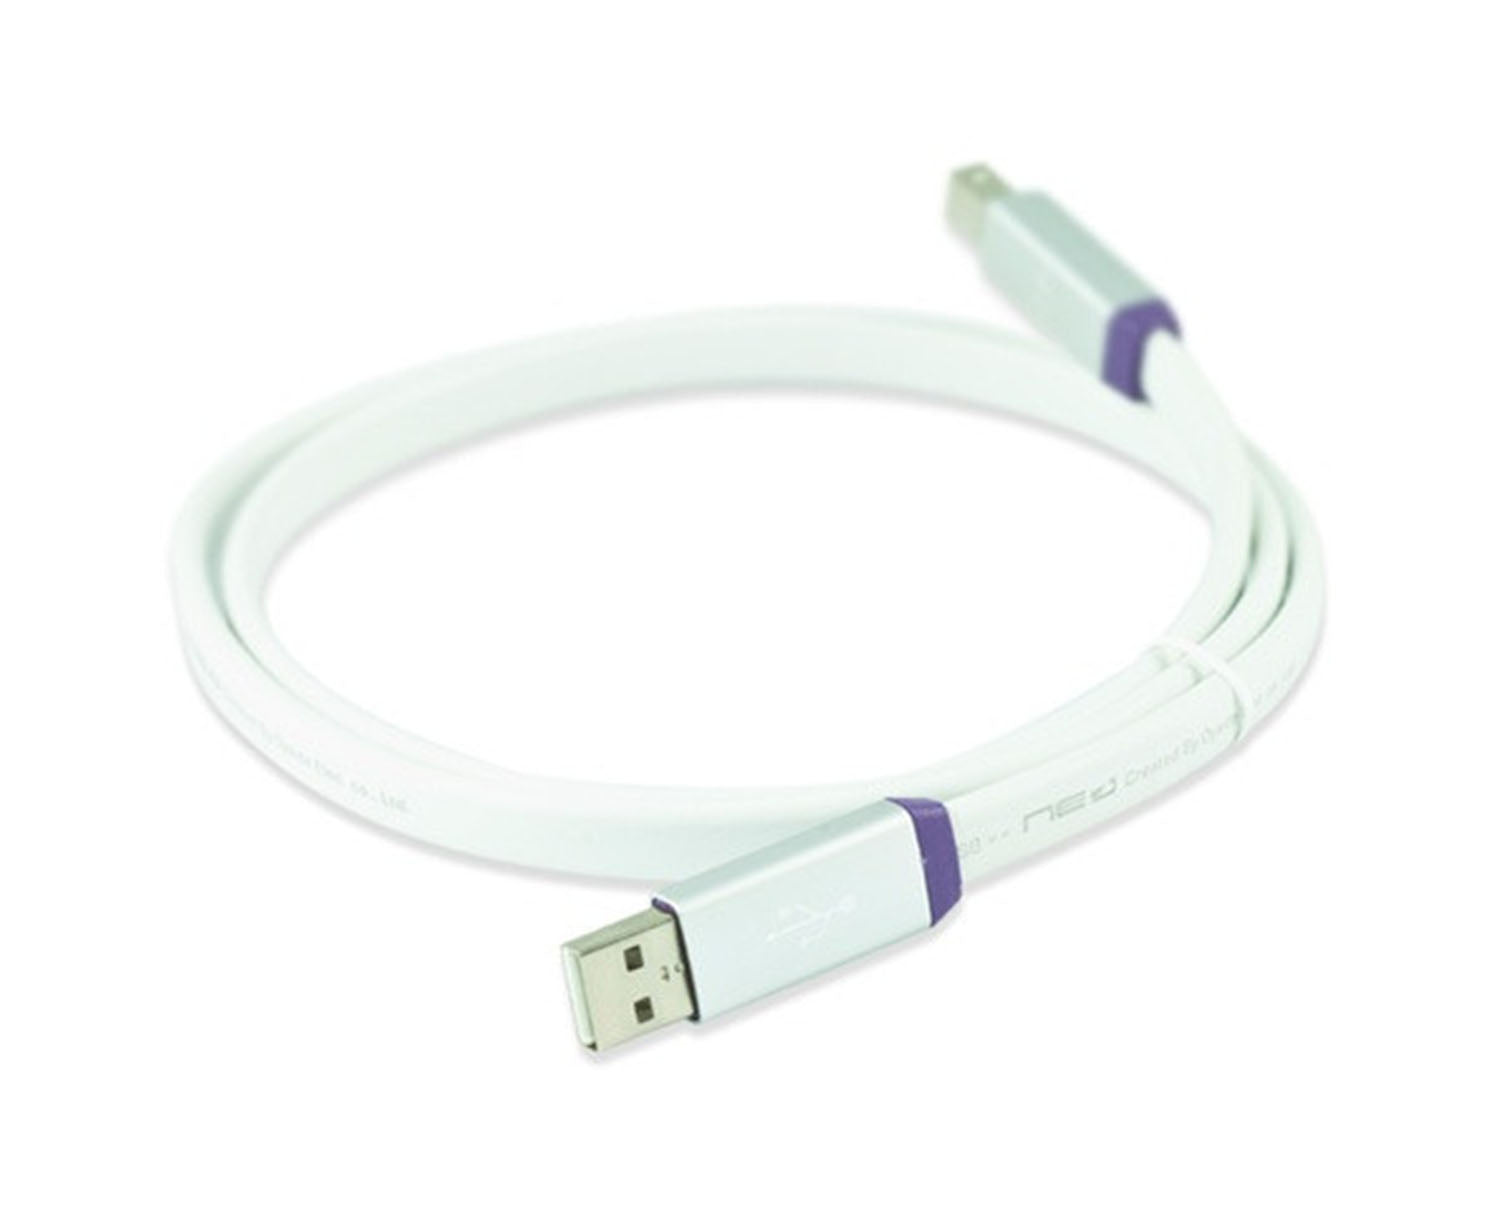 Oyaide Neo d+ USB 2.0 Class S Cable 3M - Hollywood DJ